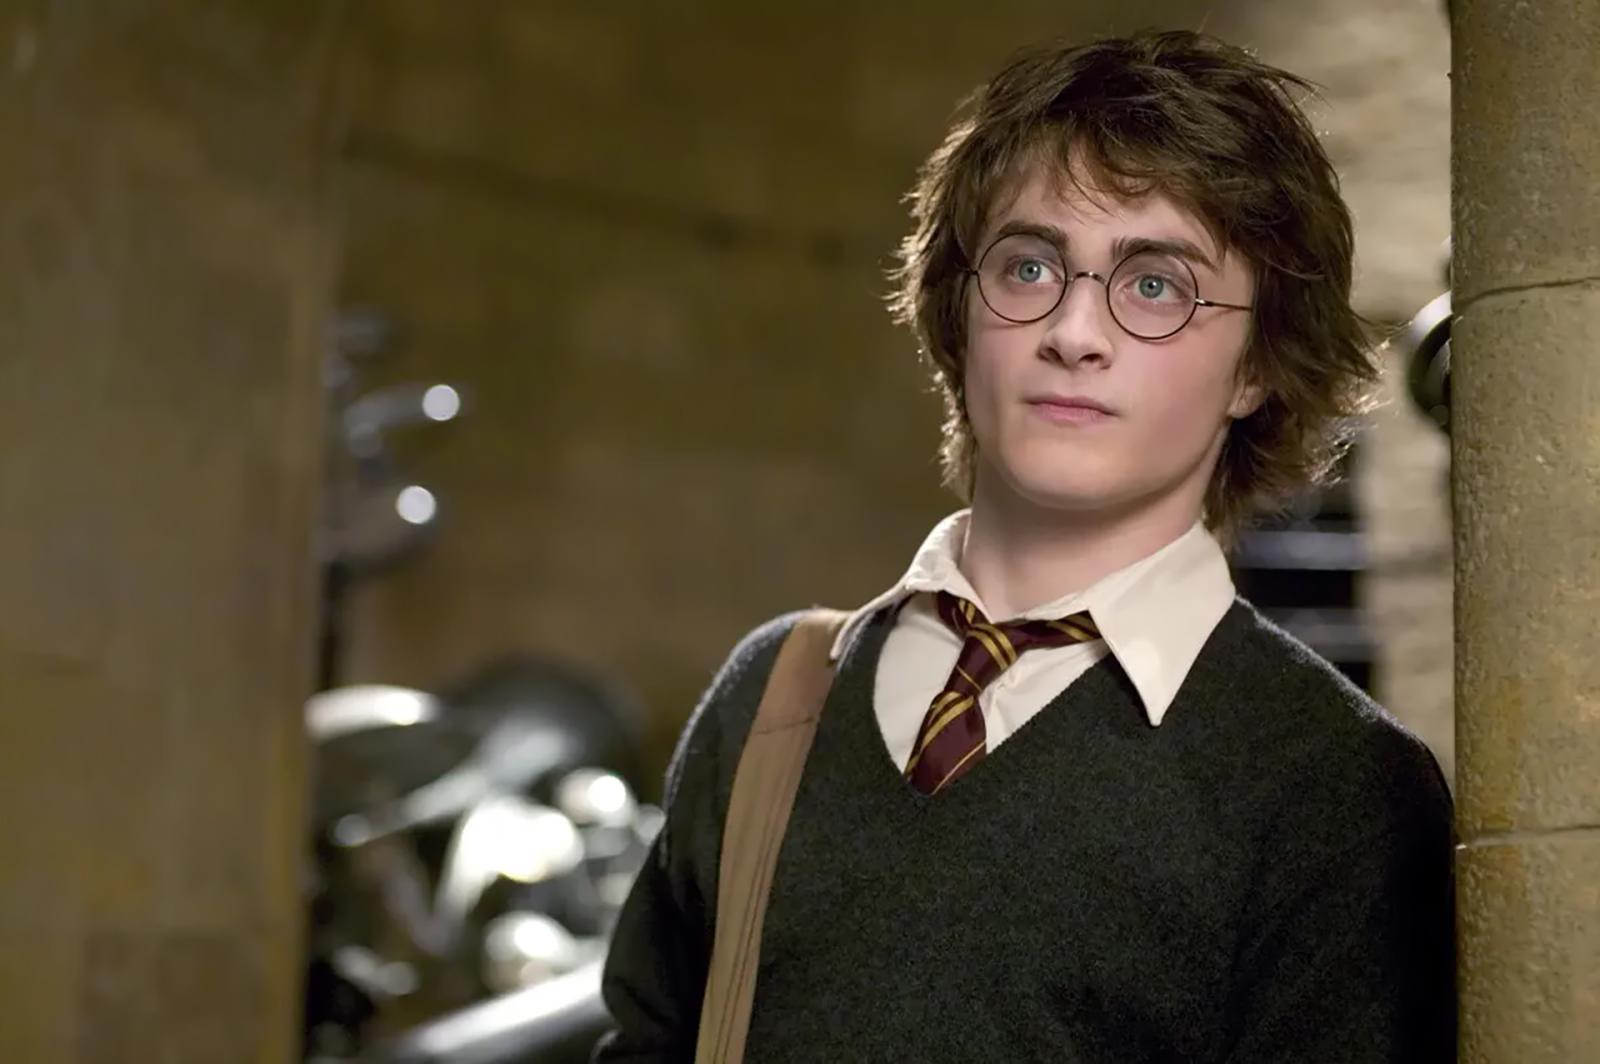 15 Things That Happened to Harry Potter Characters After The Books Ended - image 1